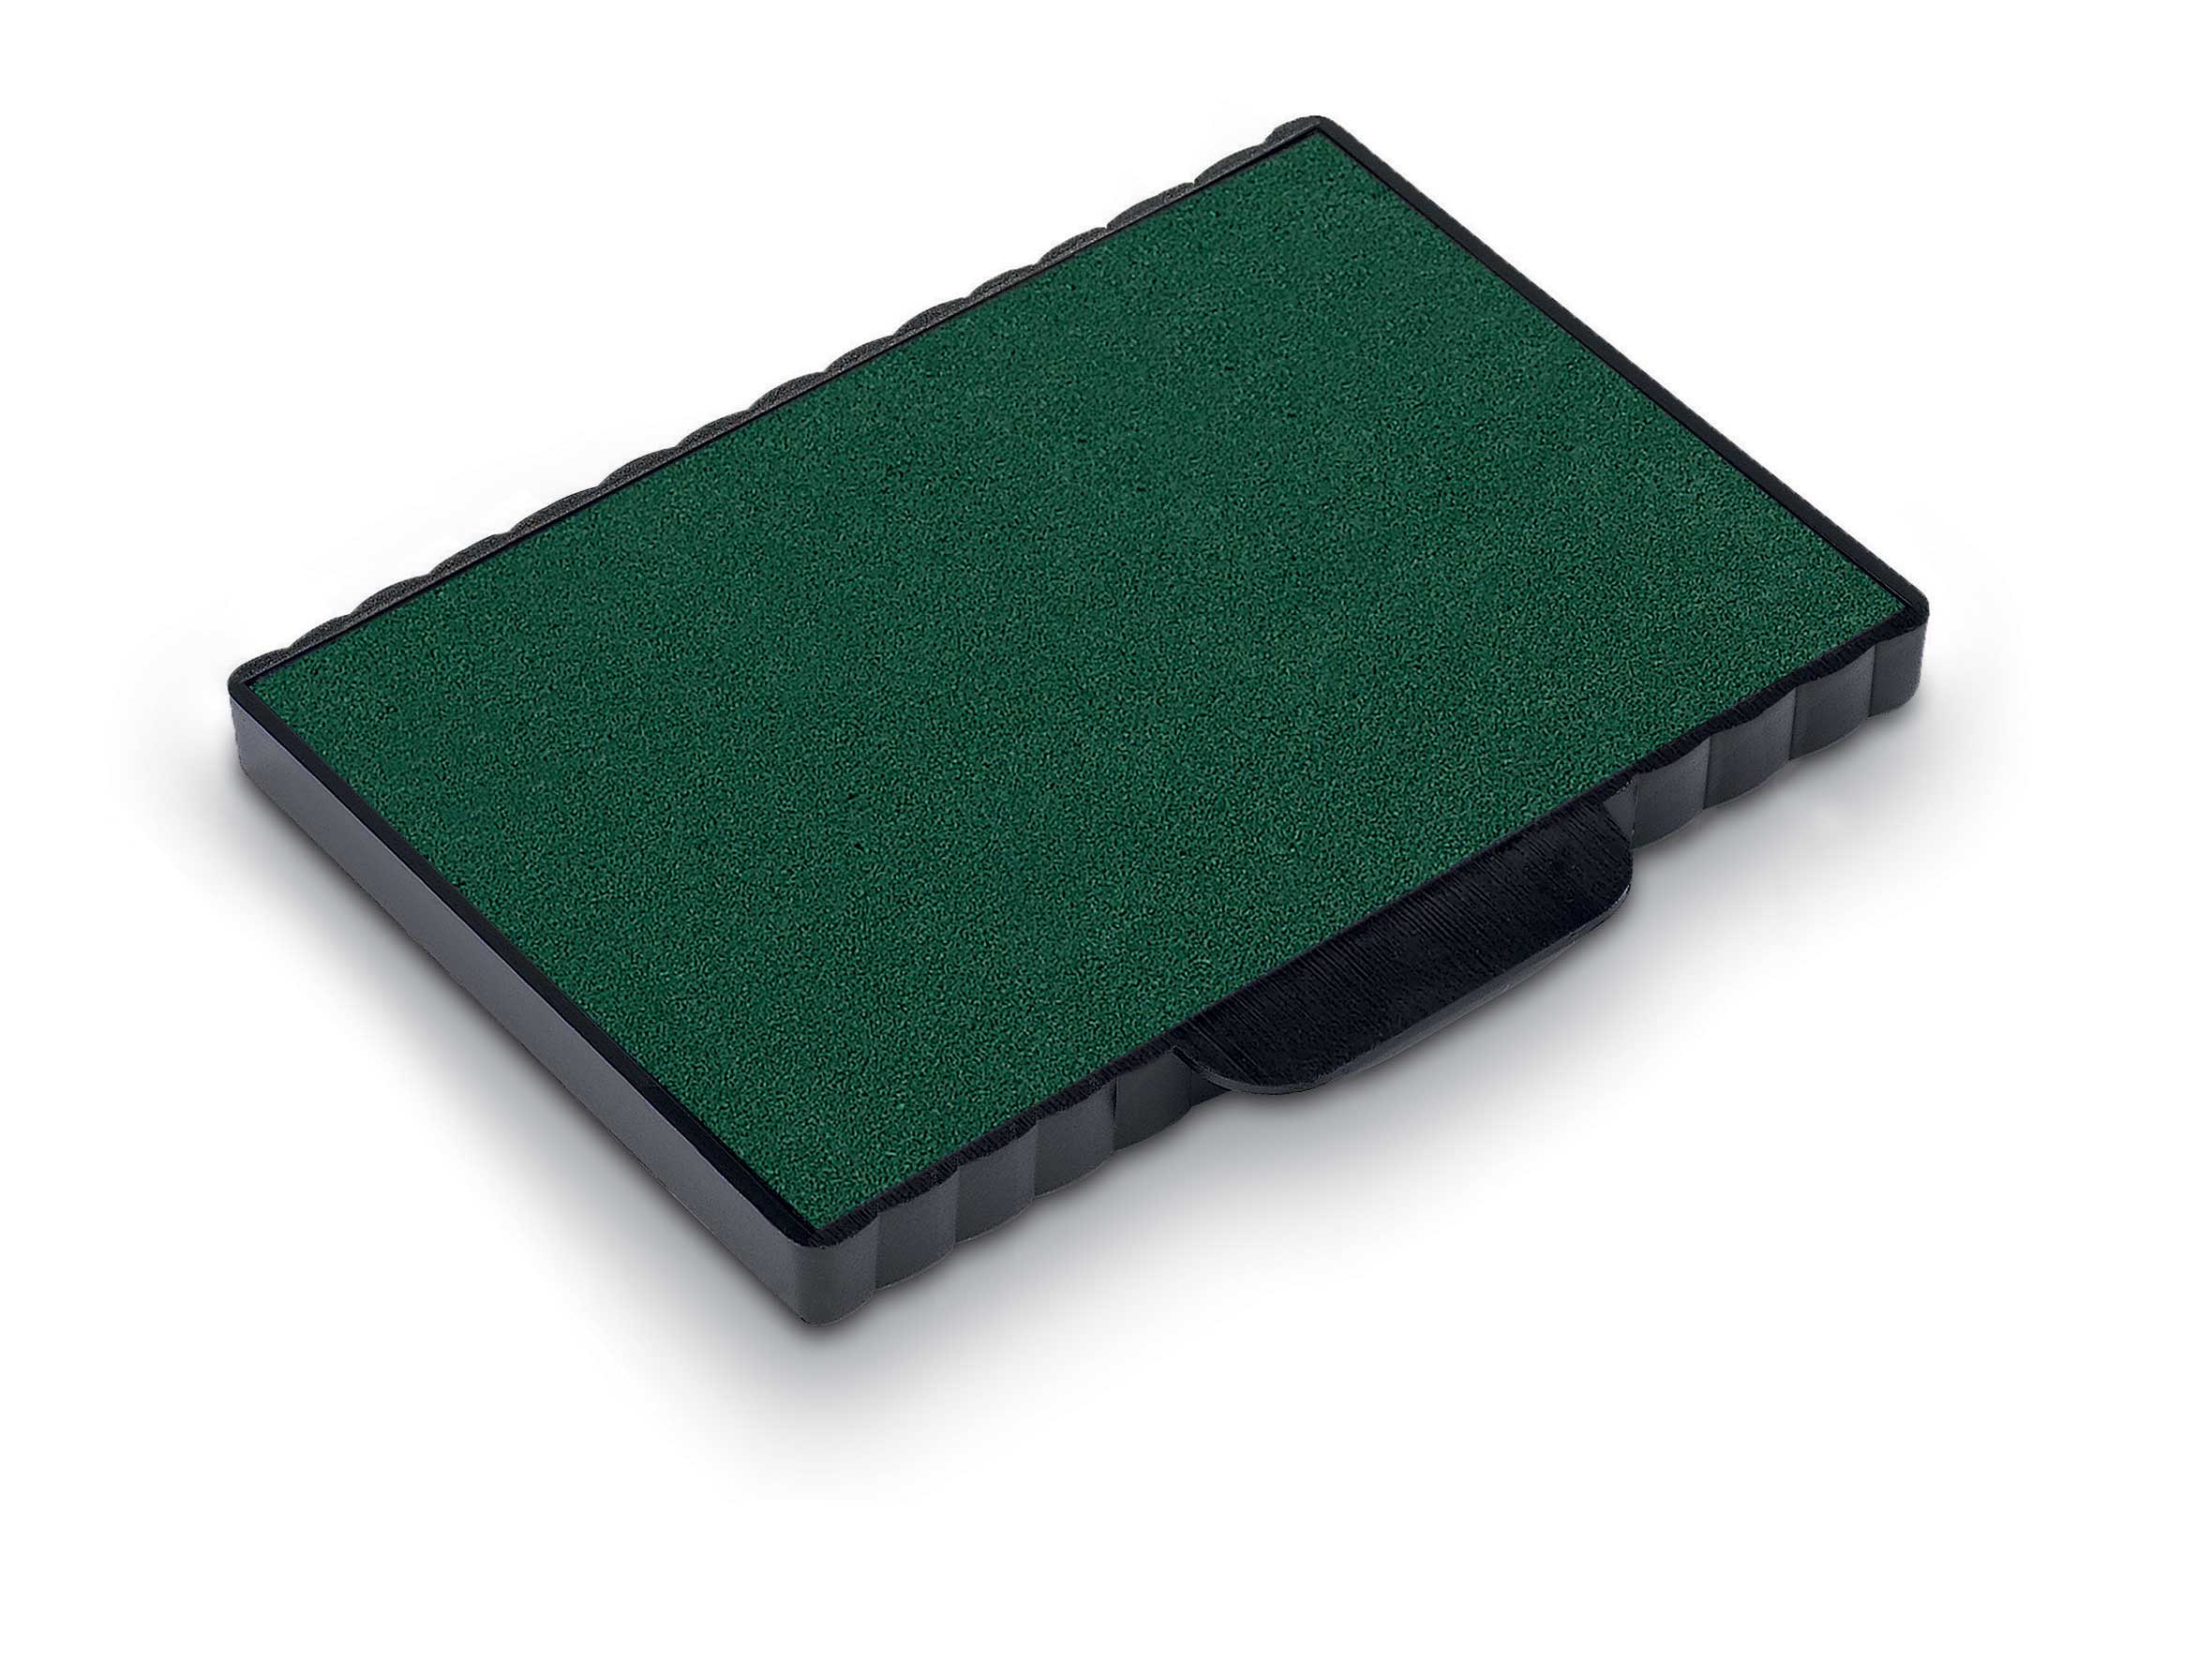 Replacement Pad for Trodat 5211 Self Inking Stamp - Green Ink Color